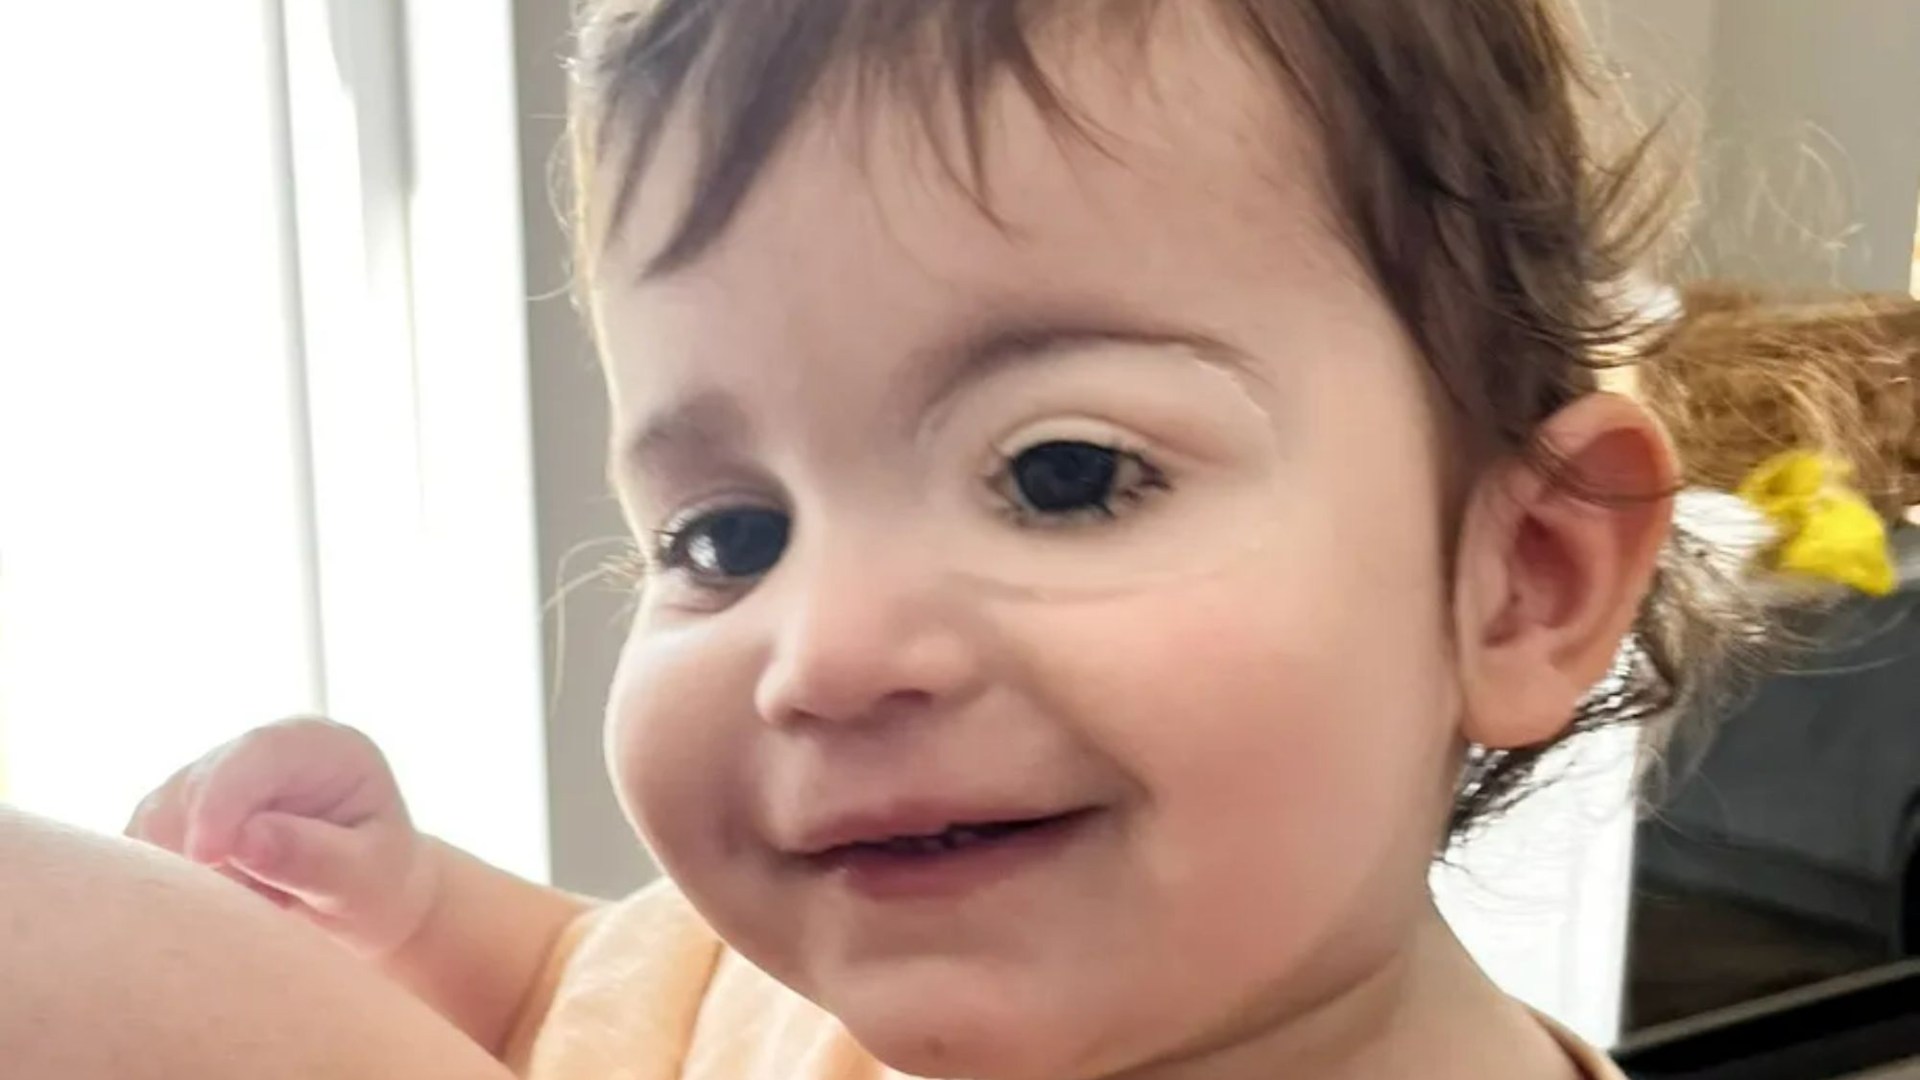 Toddler whose bloodshot eye turned out to be aggressive cancer gets ‘amazing’ prosthetic eye after losing her sight [Video]